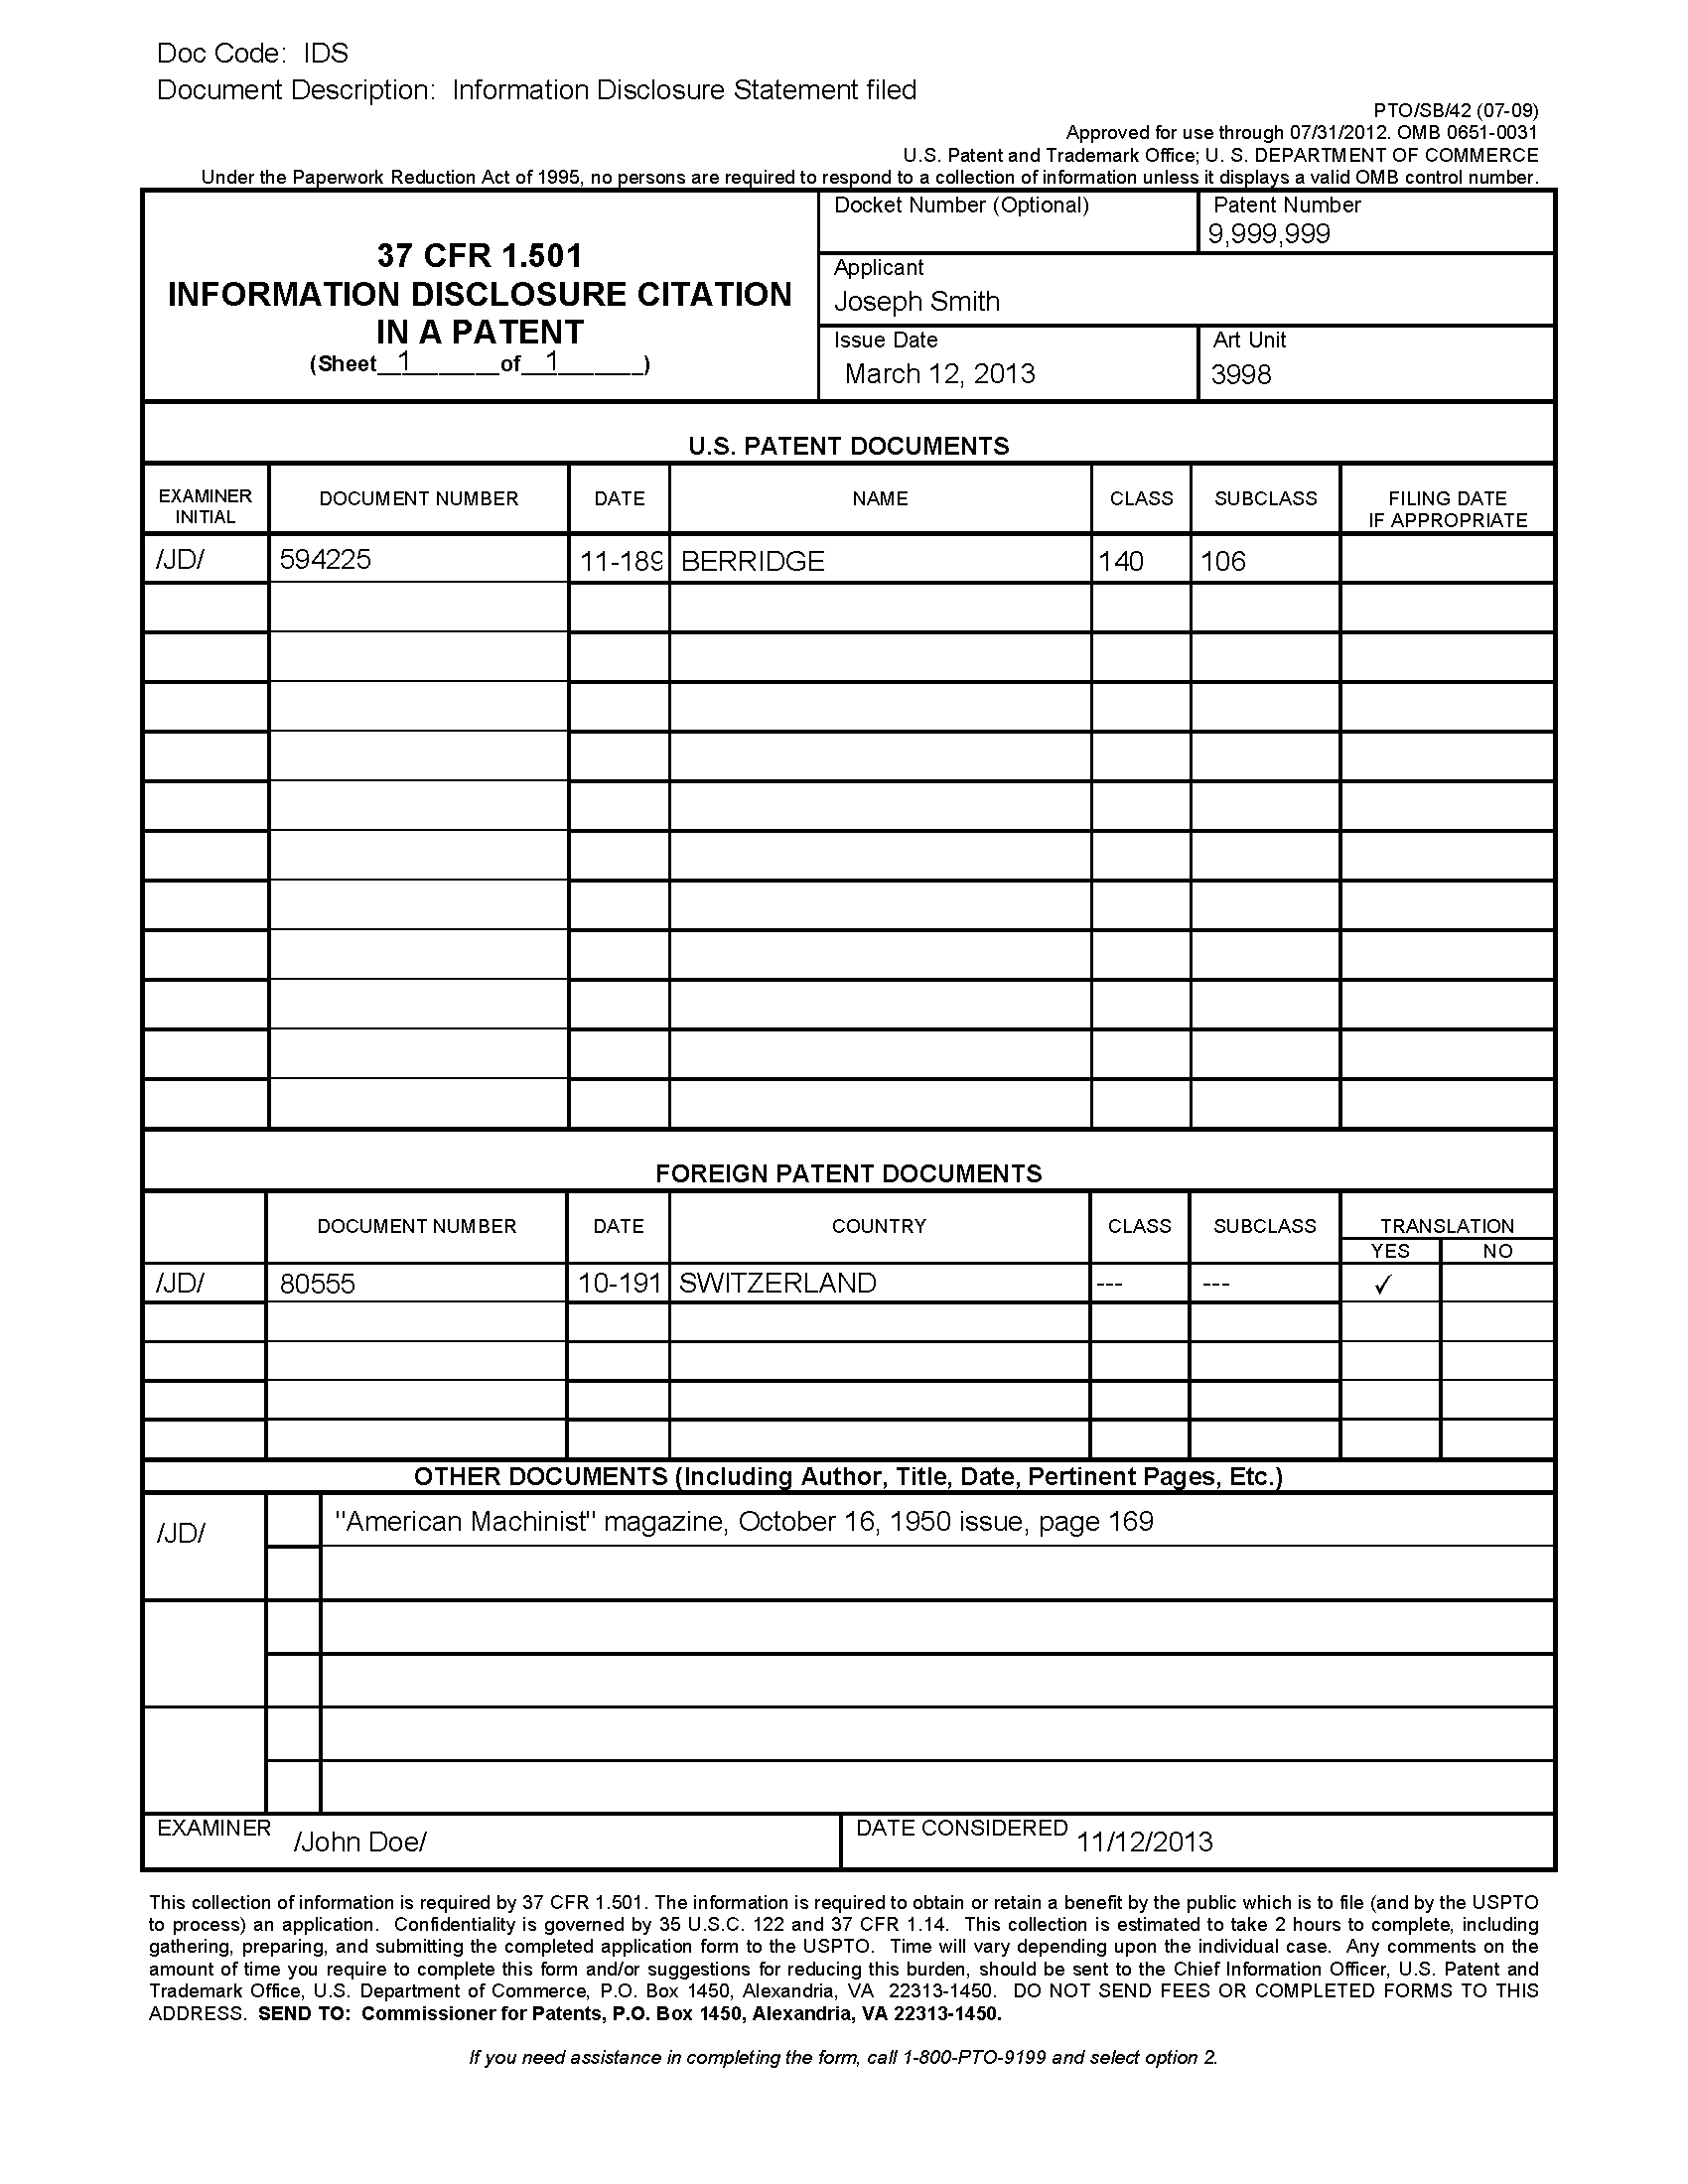 Form PTO/SB/42. 37 CFR 1.501 Information Disclosure Citation in a Patent